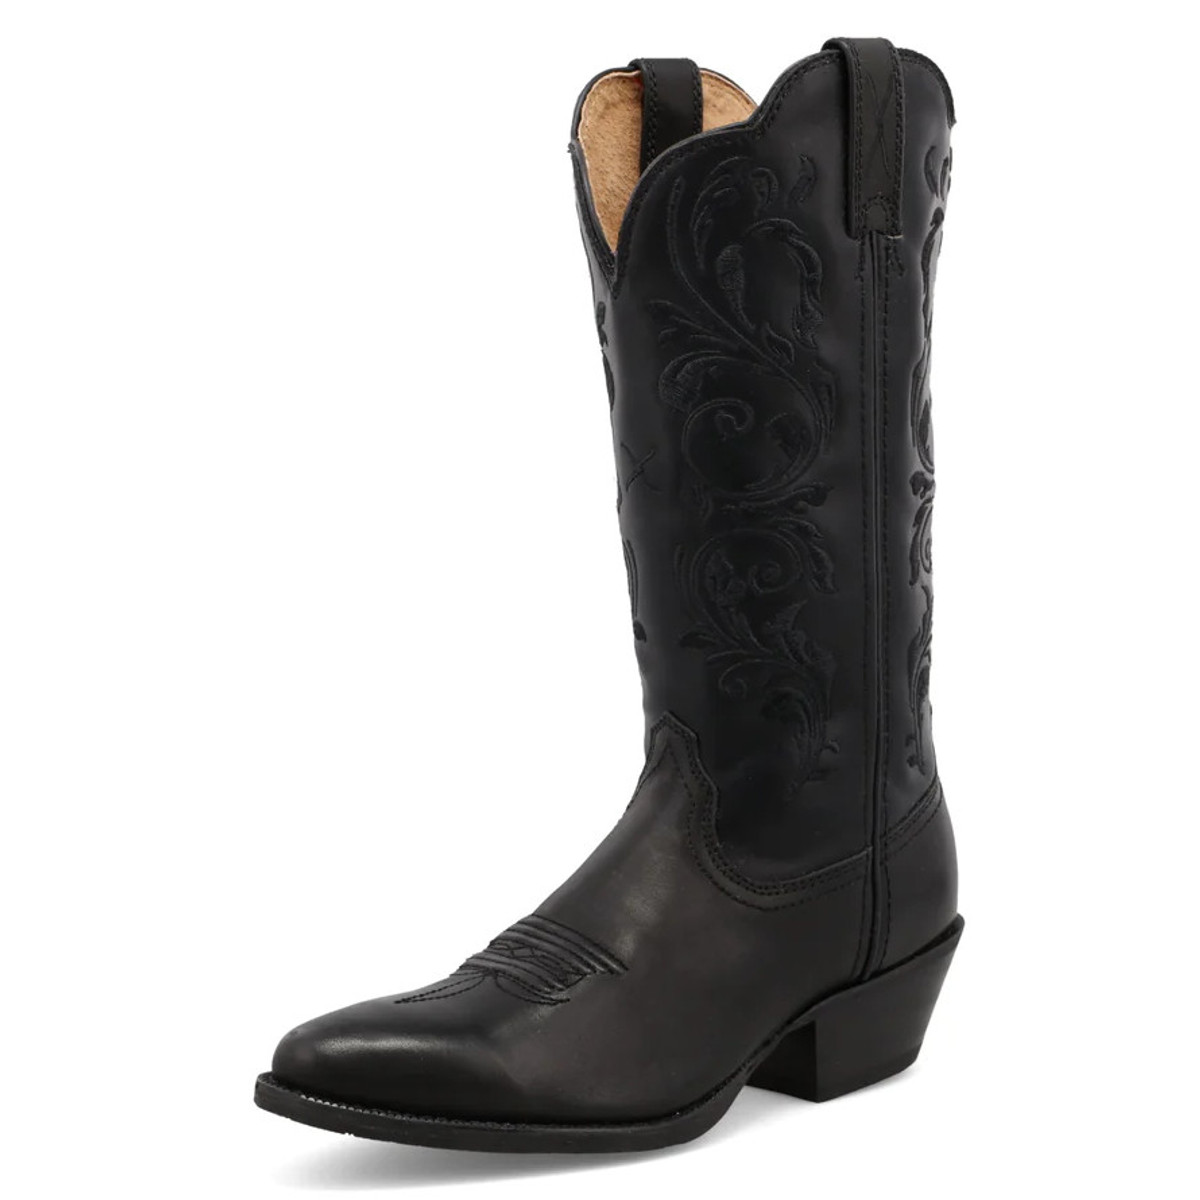 Twisted X Women's Black 12" Western R Toe Cowgirl Boots